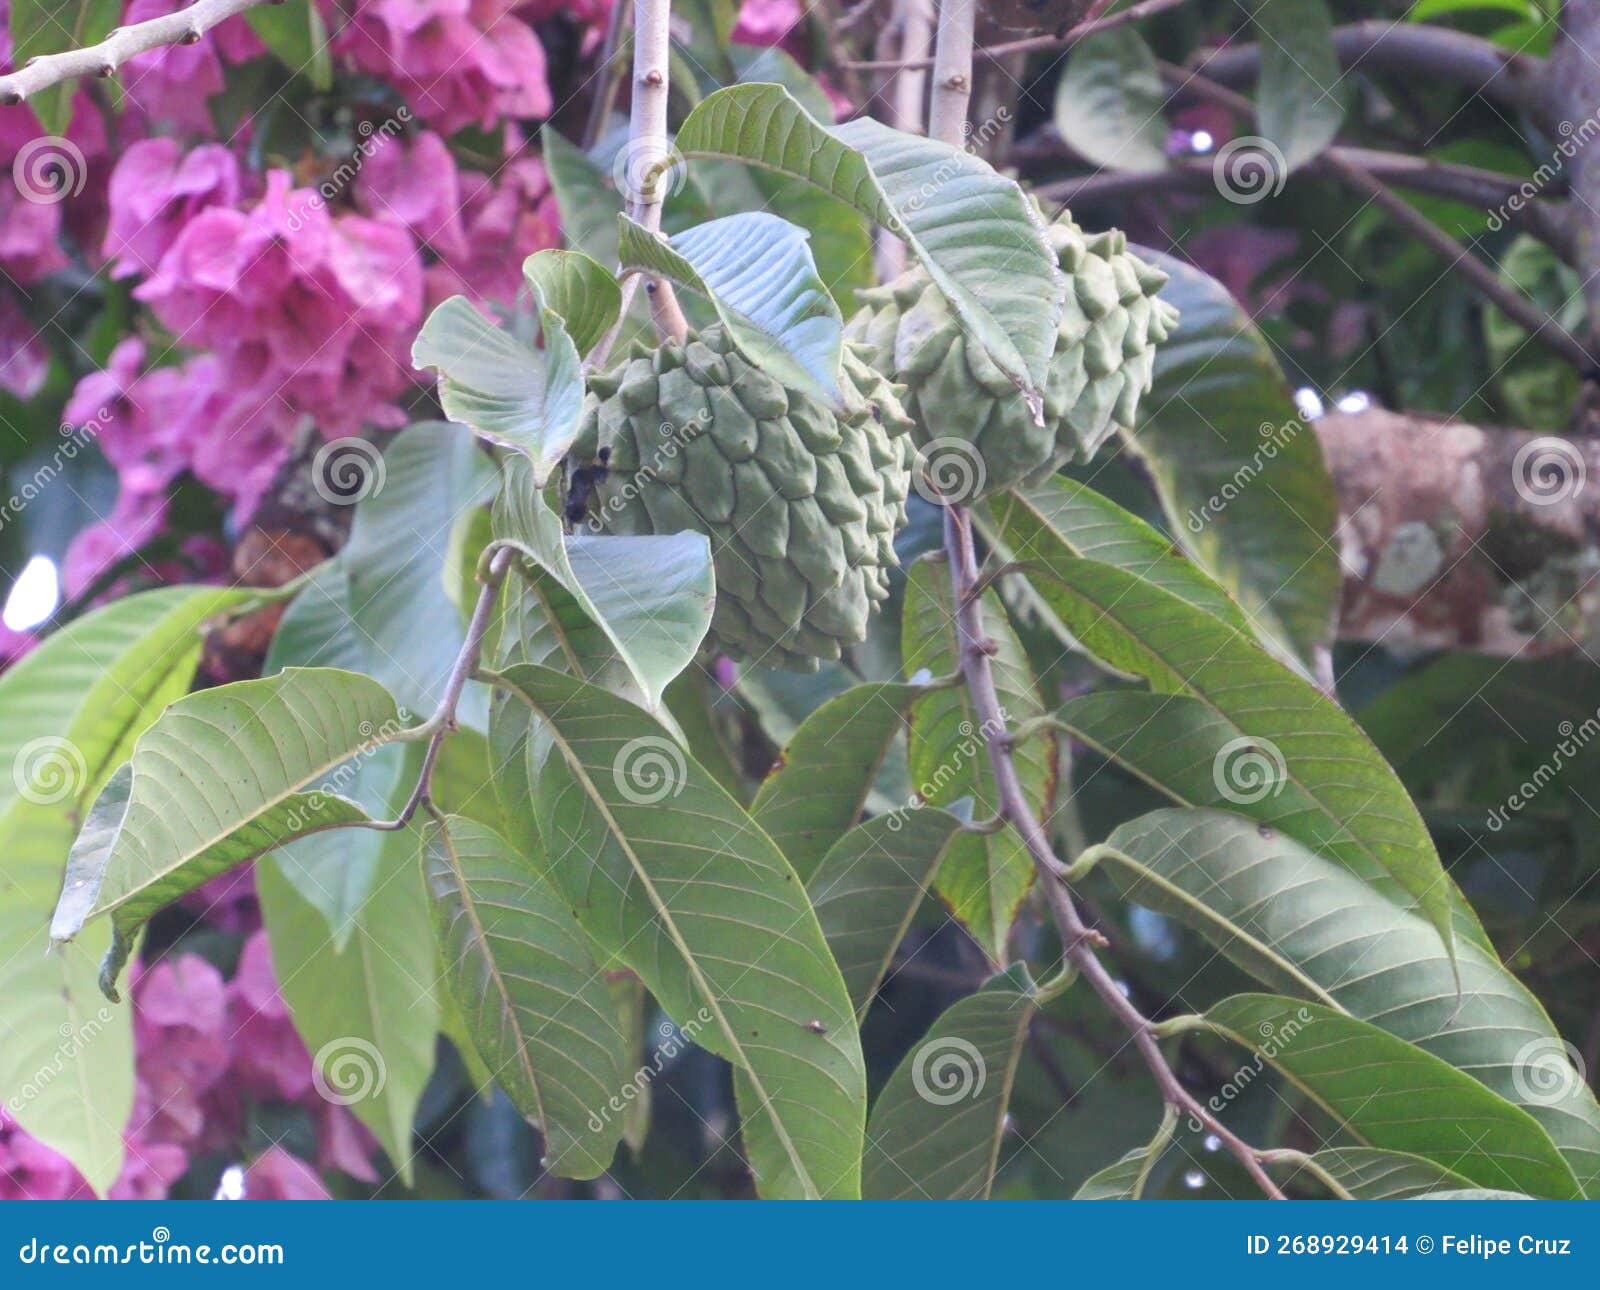 annona squamosa, popularly known as 'fruta-do-conde'. shot in ilhabela, sp, brazil.